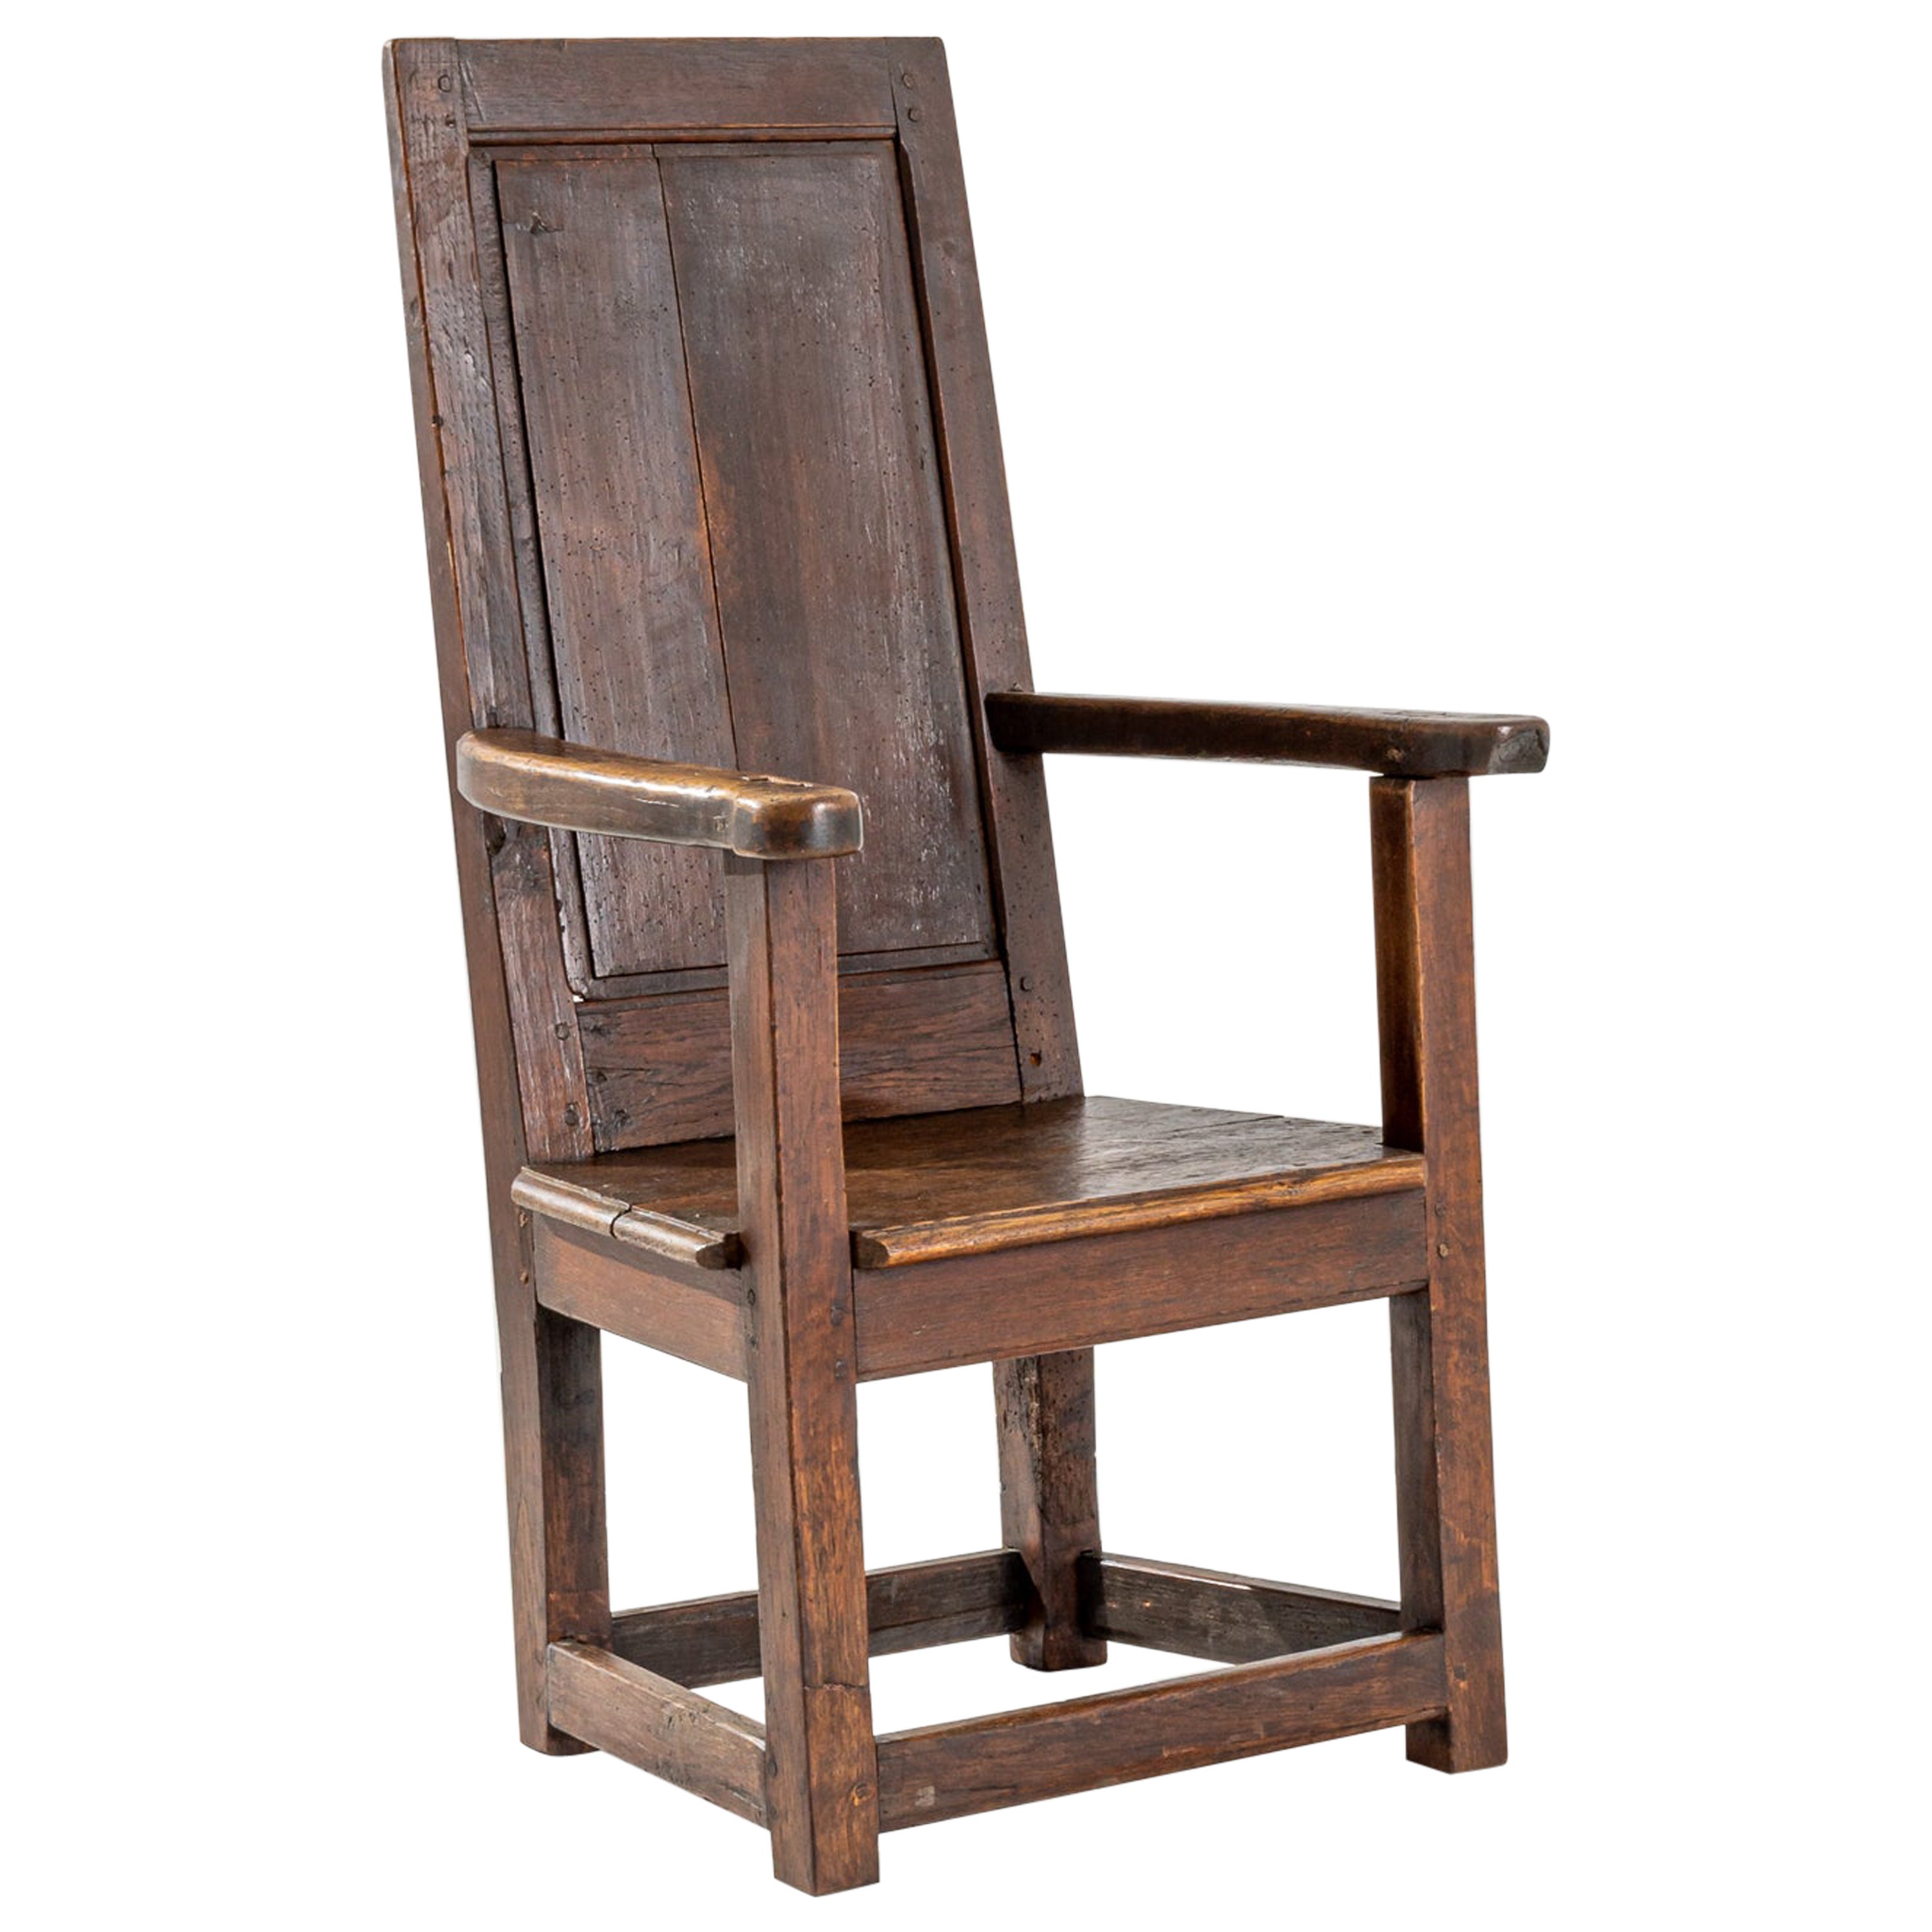 18th Century French Patinated Wooden Armchair